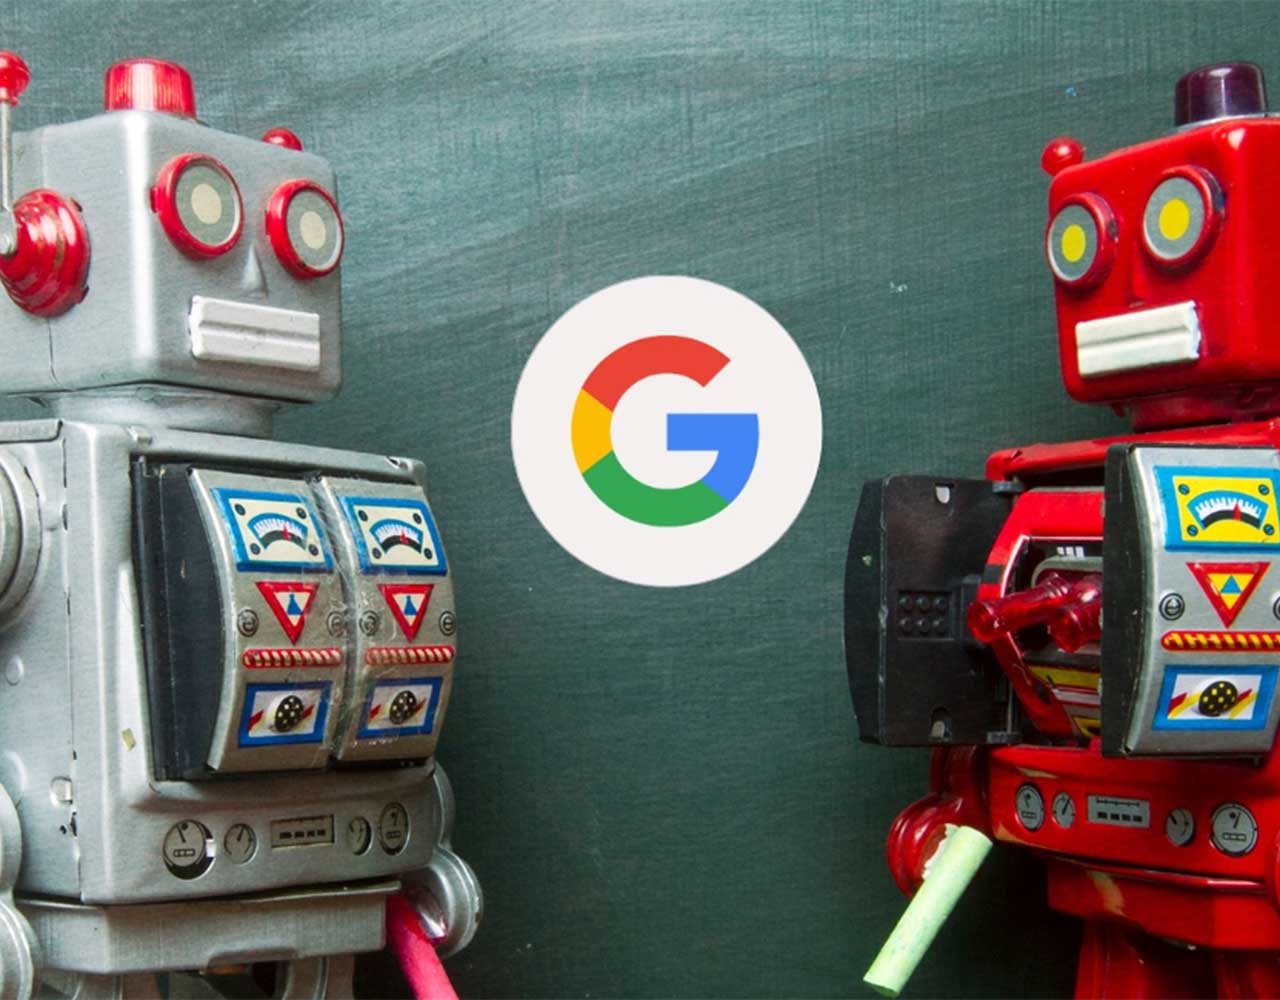 Two robots looking at each other with the Google Icon in the center